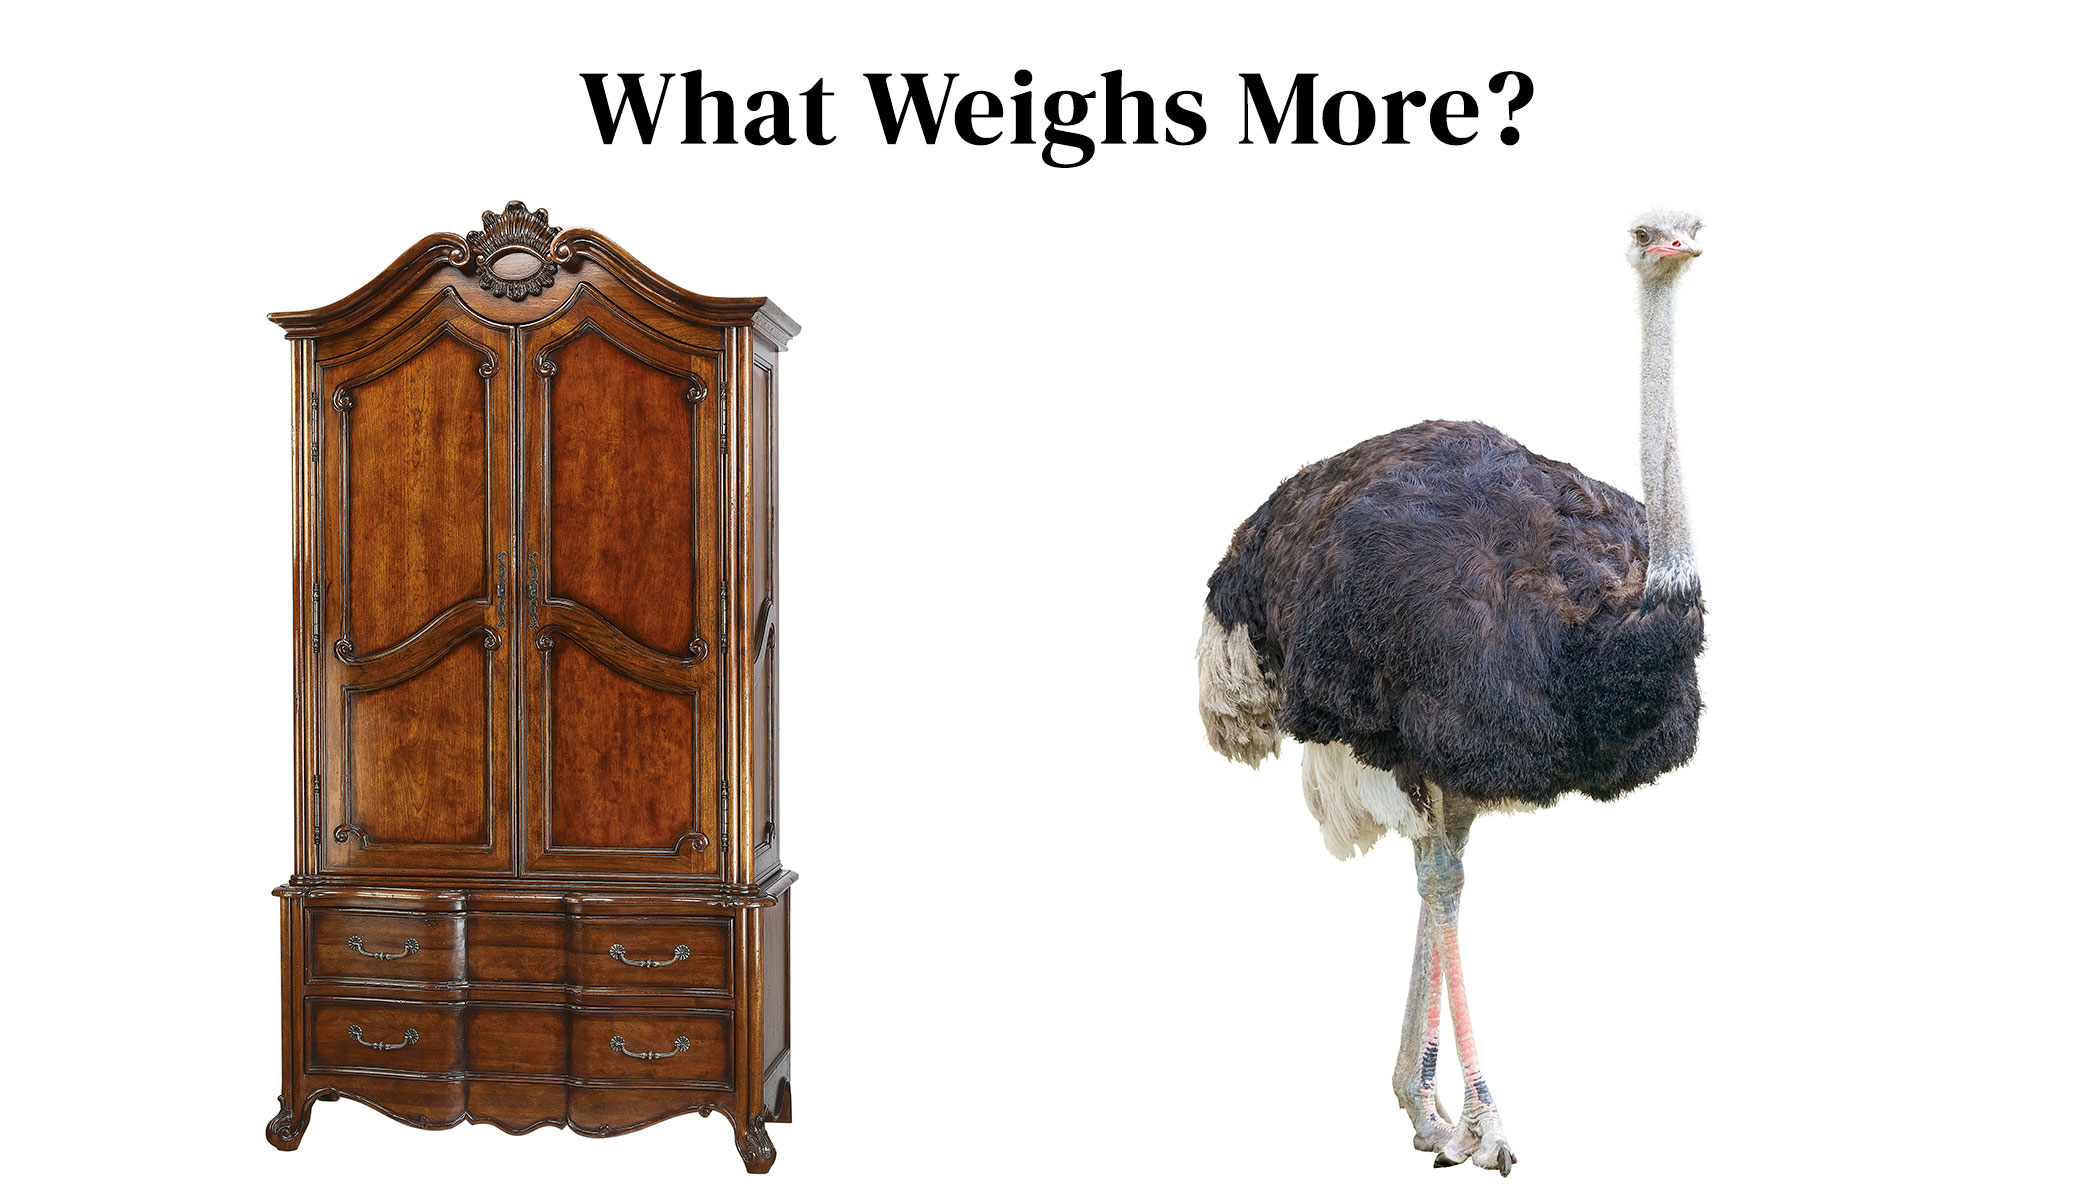 What weighs more: Wooden Armoire or Adult Ostrich?